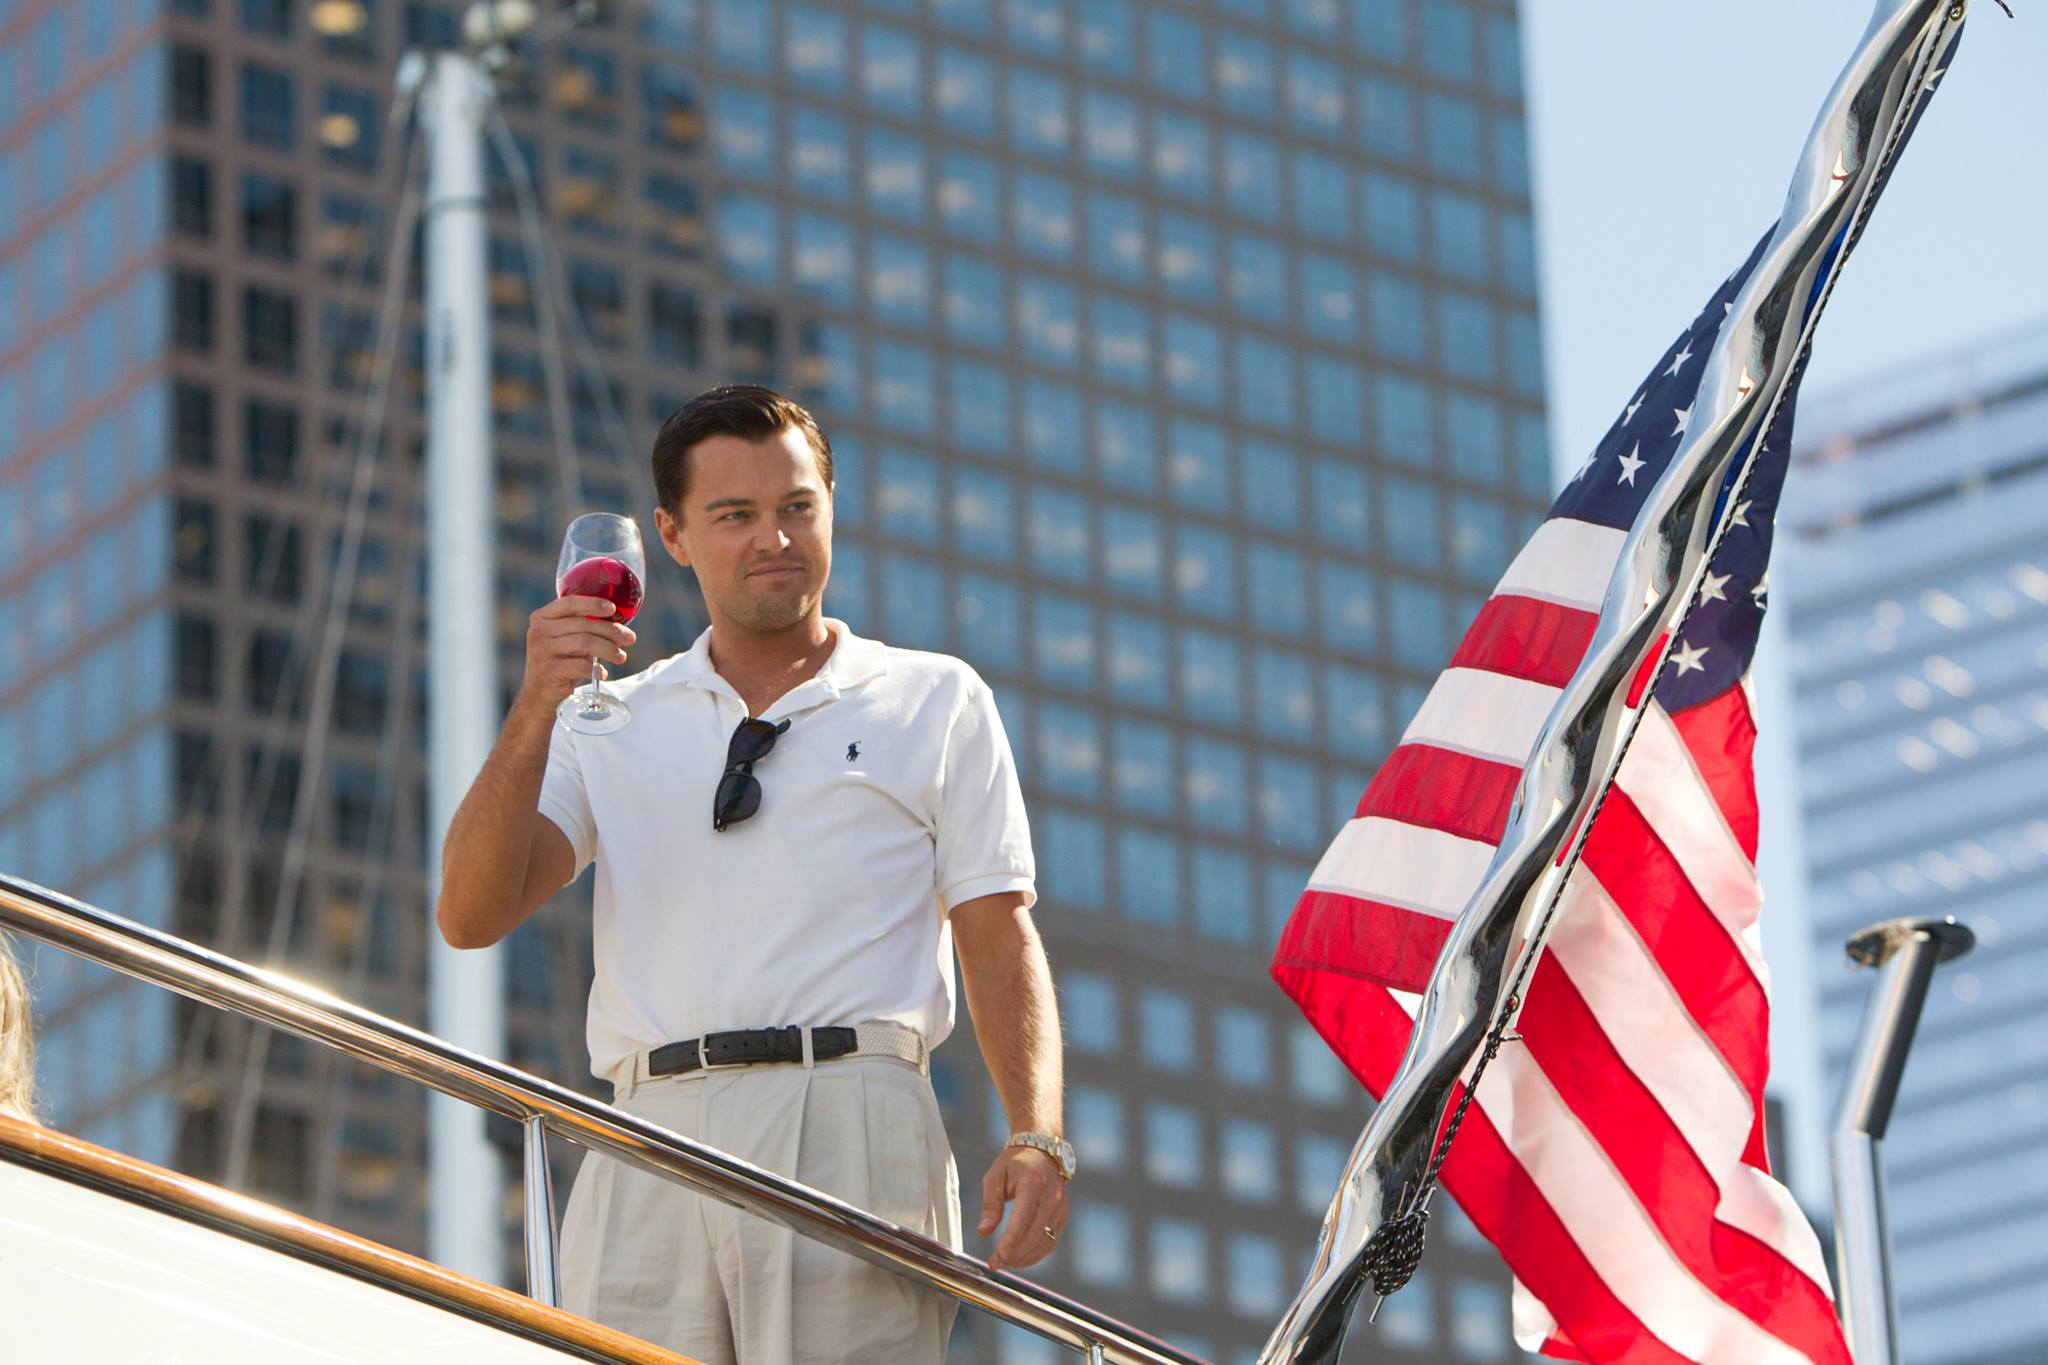 facebook.com“The Wolf of Wall Street” was the first film of many to switch from traditional celluloid film to all digital.